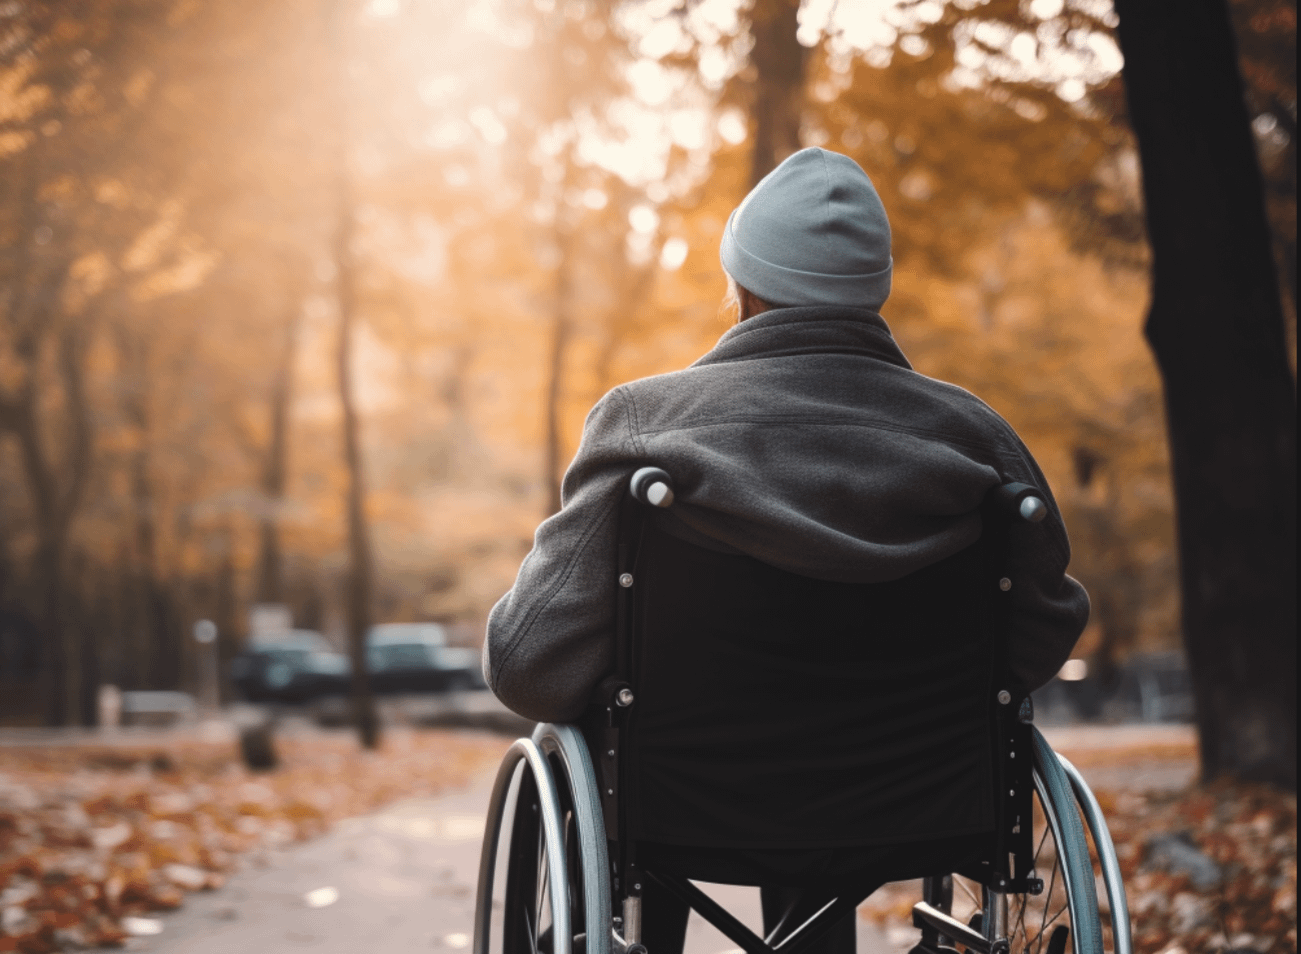 A person in a wheelchair at a park (fall weather)